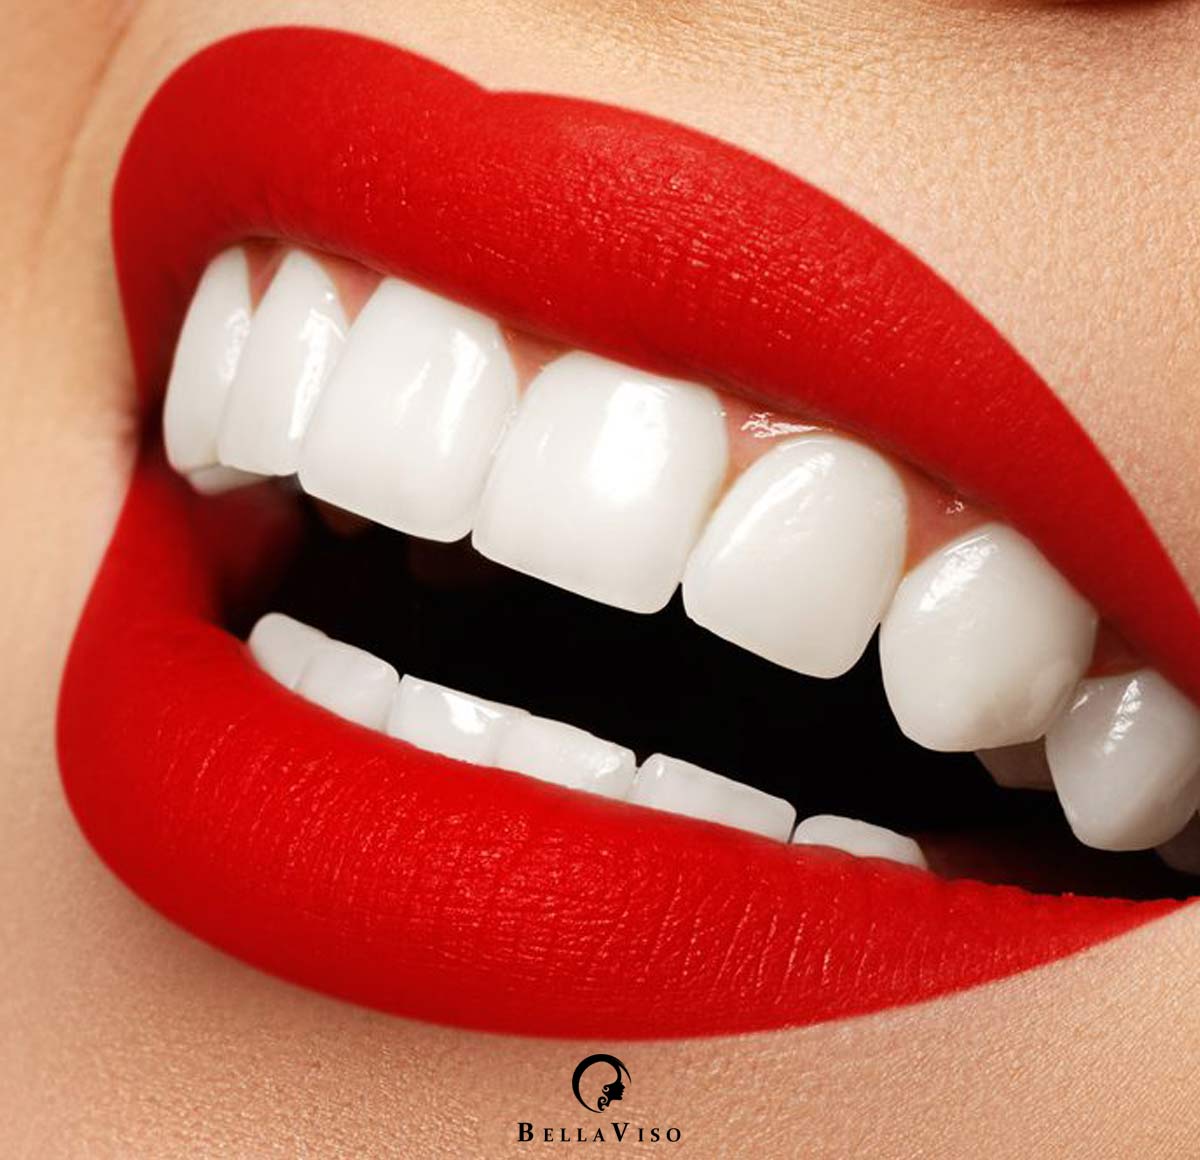 Achieve a Dazzling Smile with Affordable Dental Veneers Treatment in Dubai